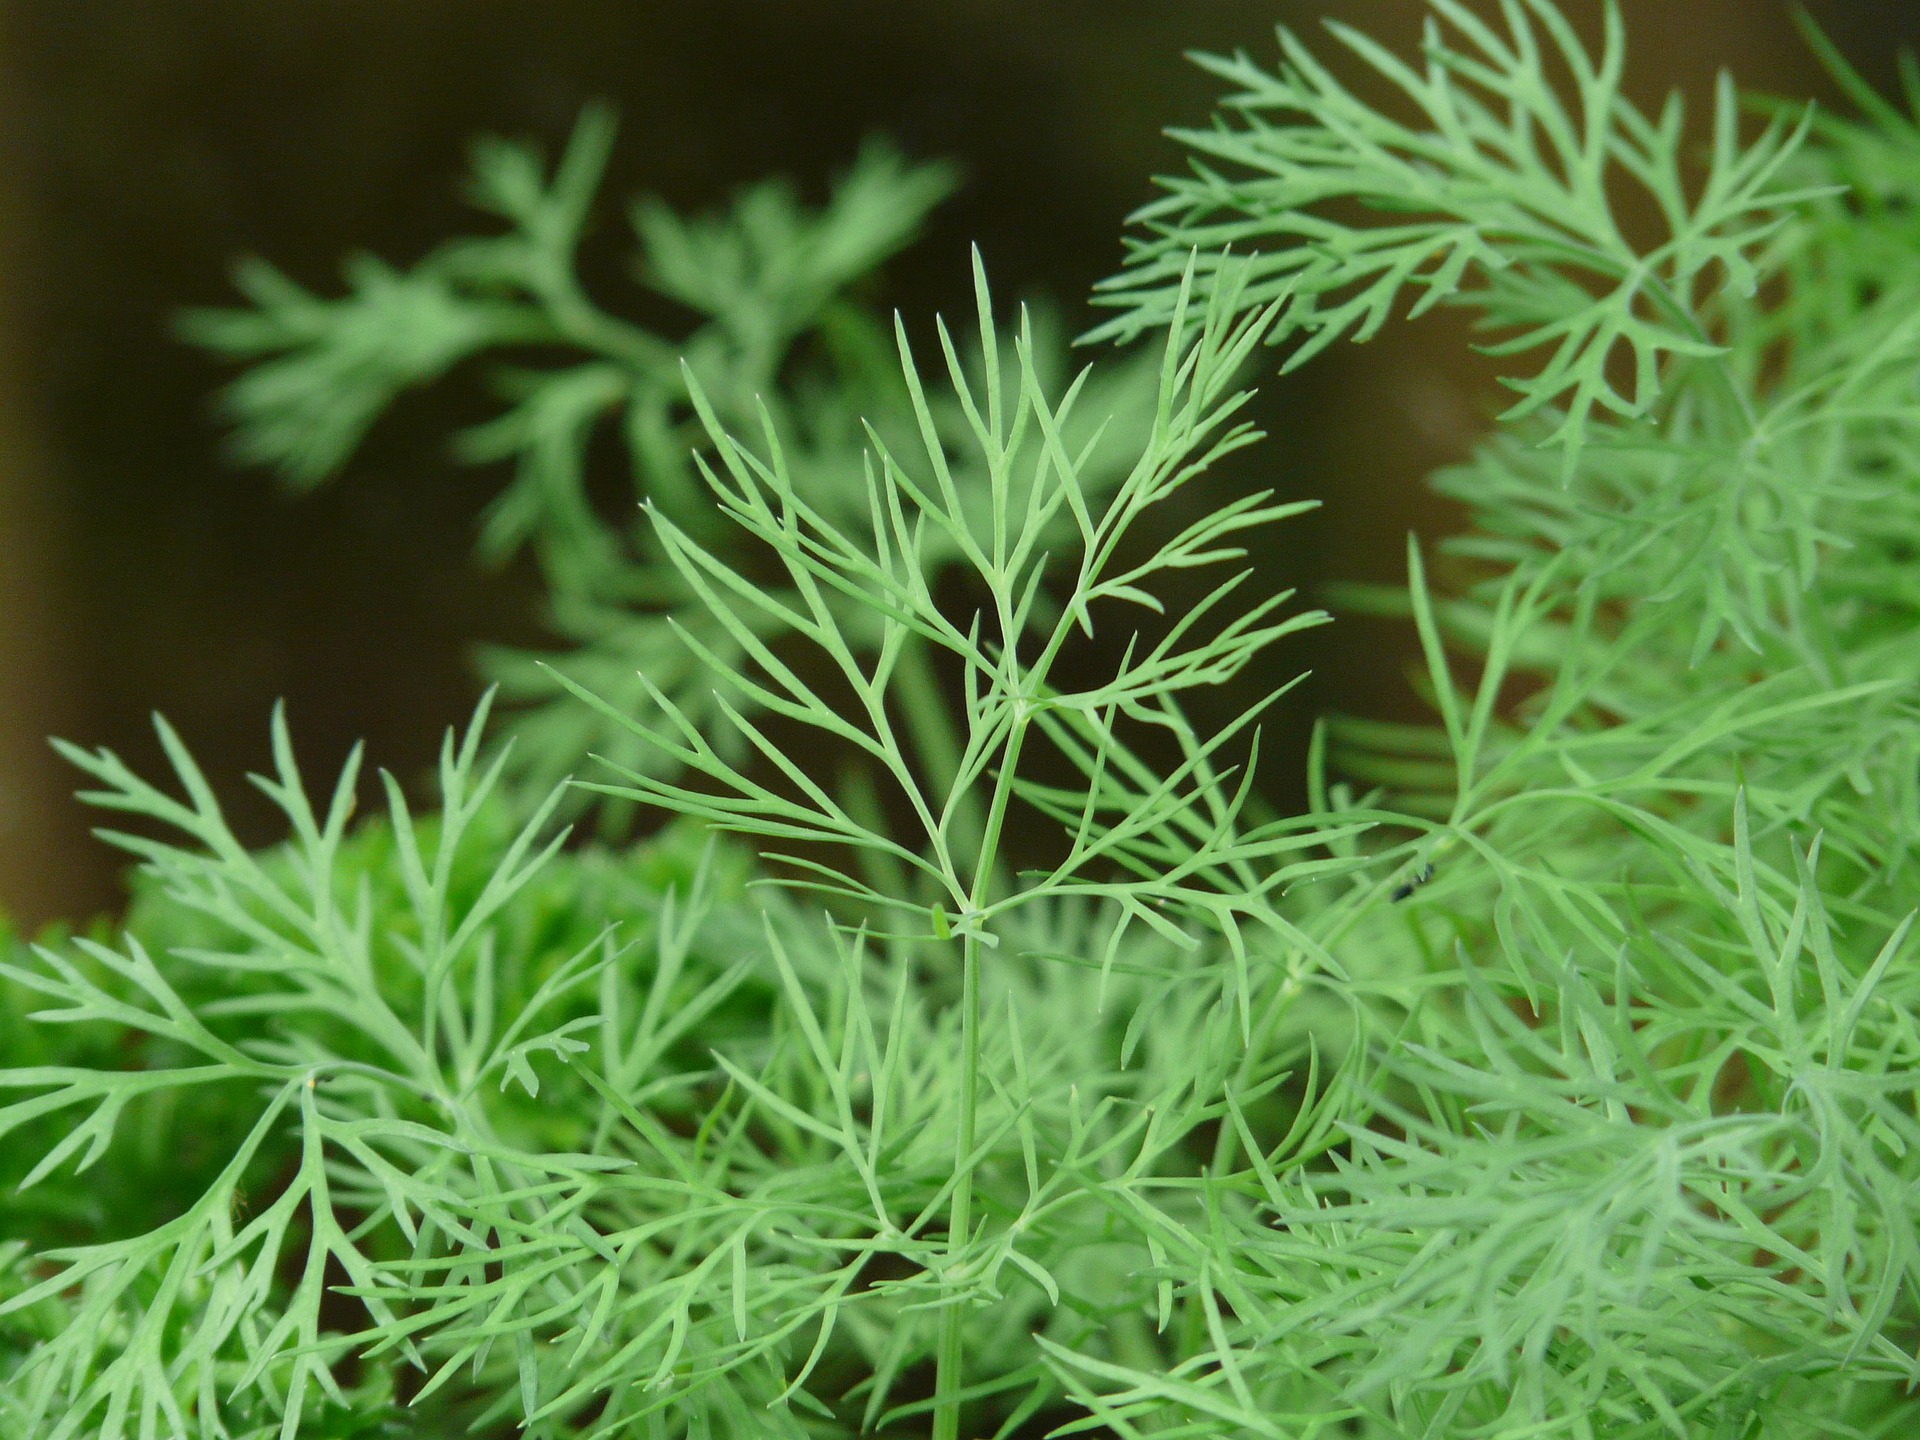 Dill: Planting, Growing, and Harvesting Dill Weed | The Old Farmer's